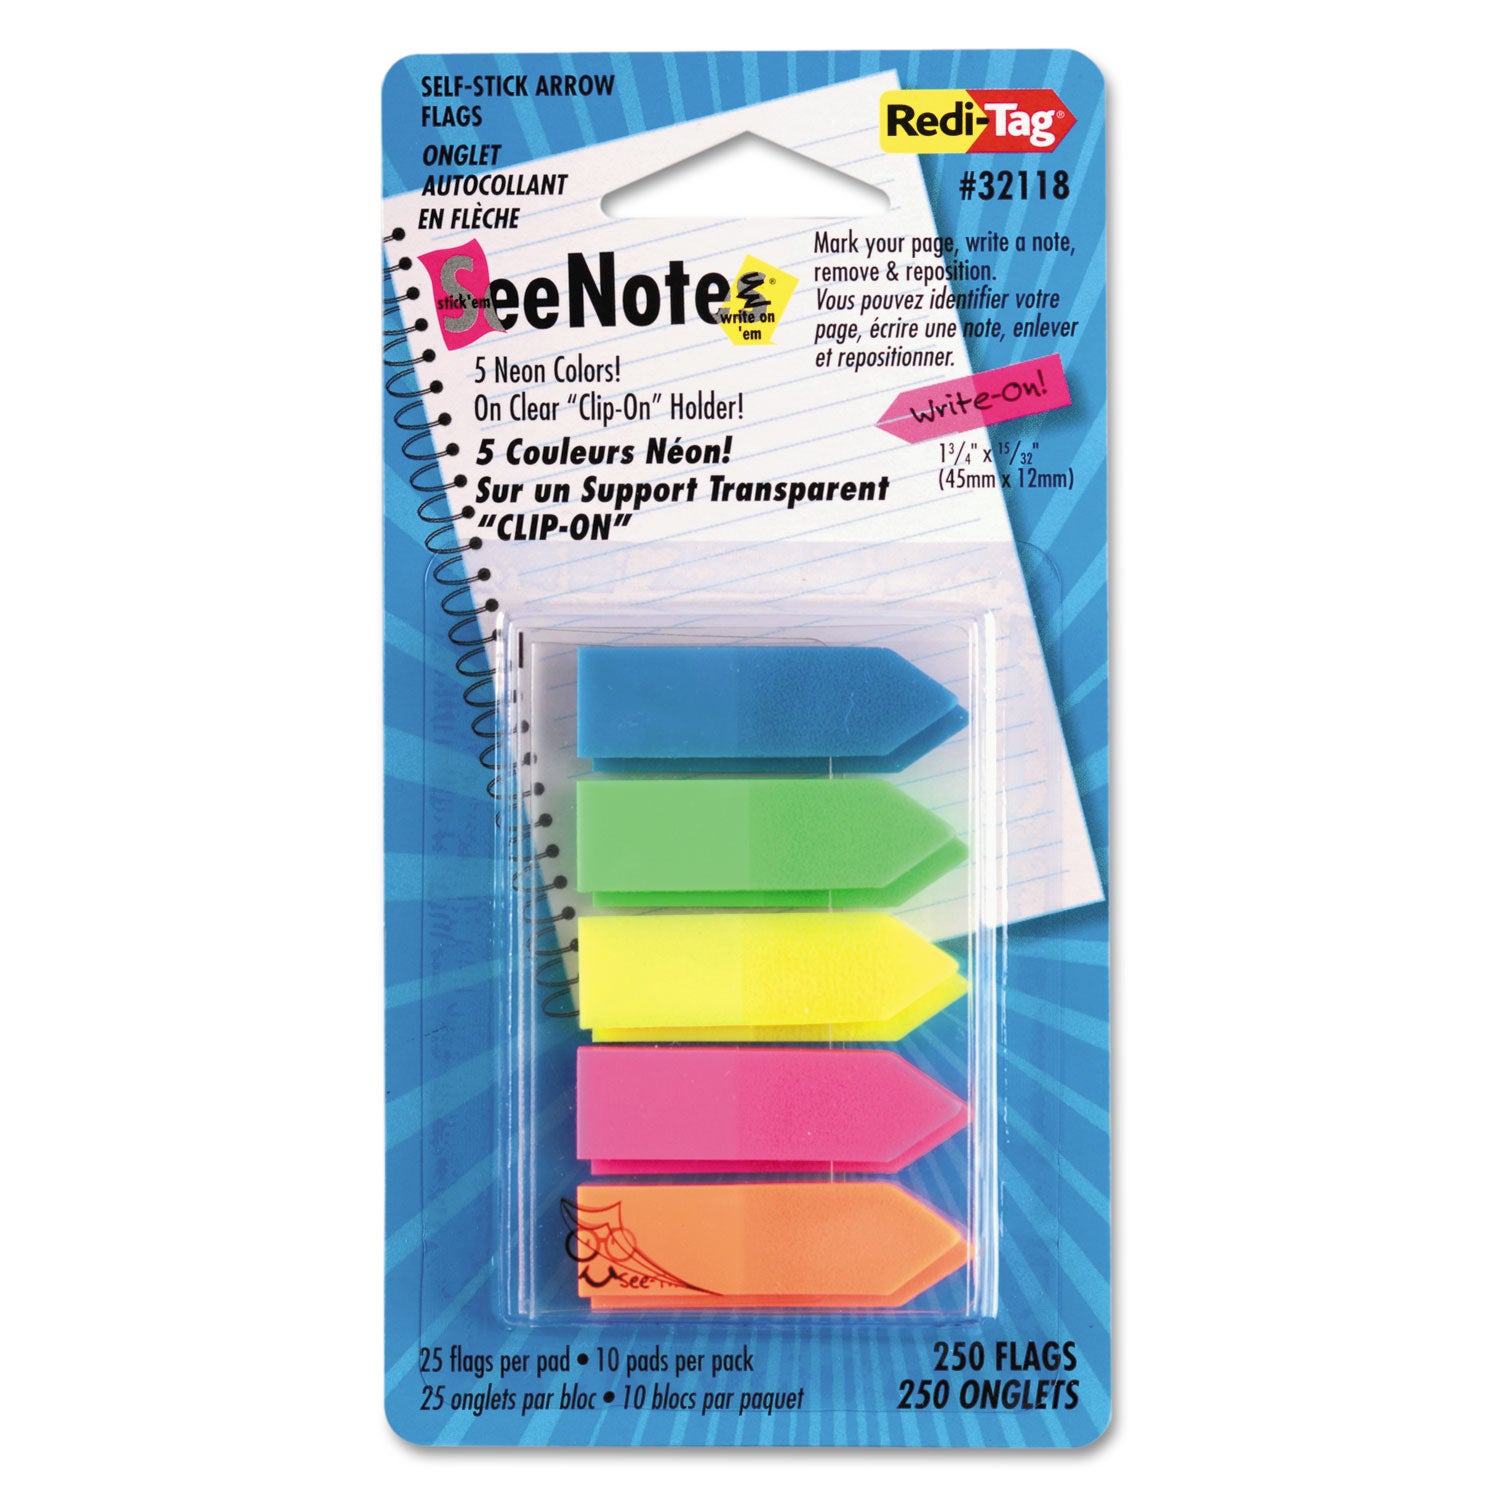 SeeNotes Transparent-Film Arrow Page Flags, Assorted Colors, 50/Pad, 5 Pads - 